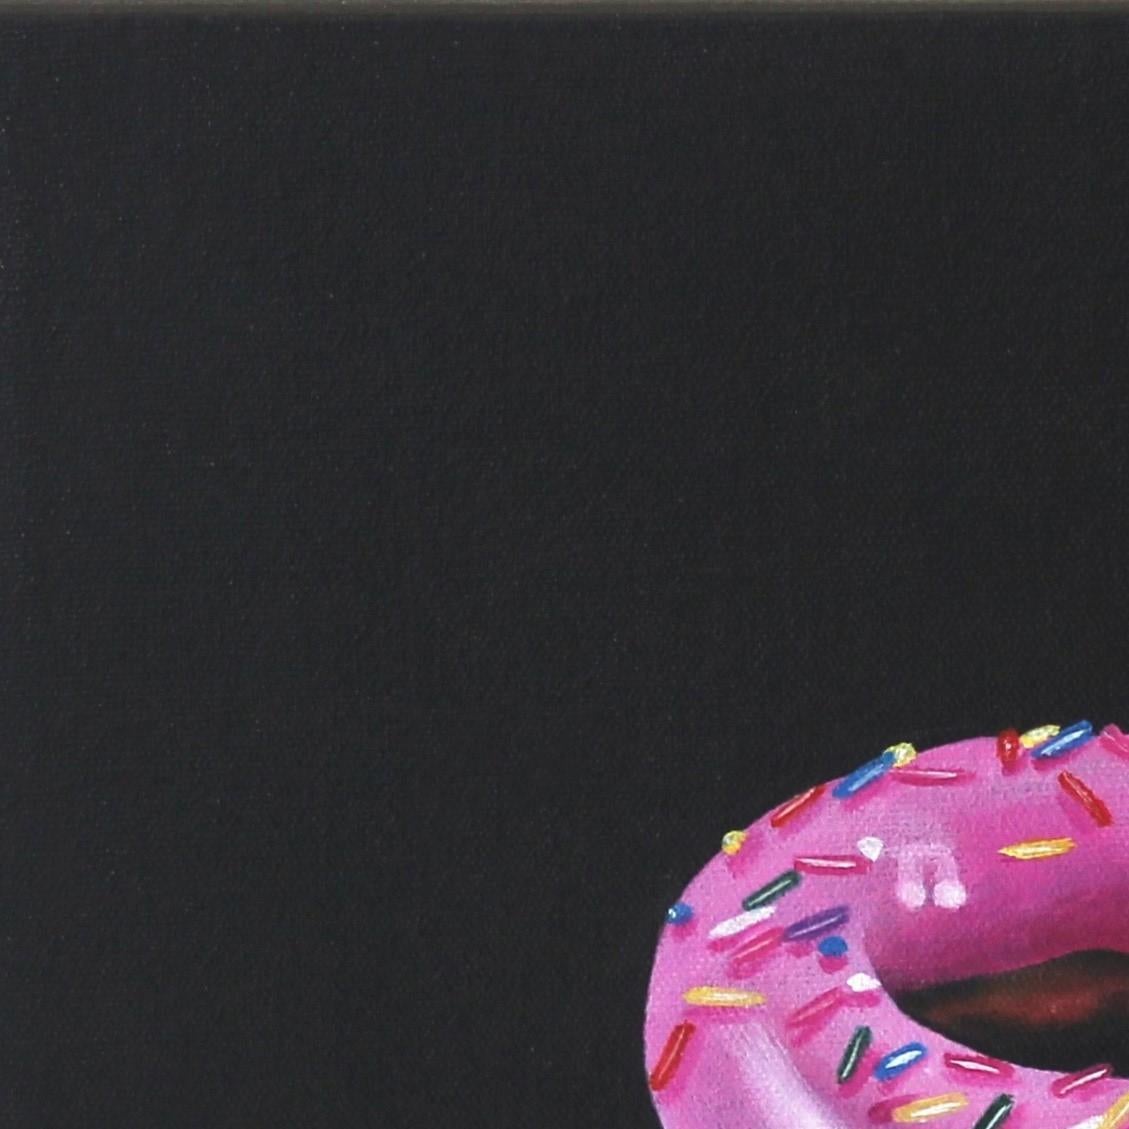 Pink Donut With Rainbow Sprinkles - Photorealist Painting by Erin Rothstein